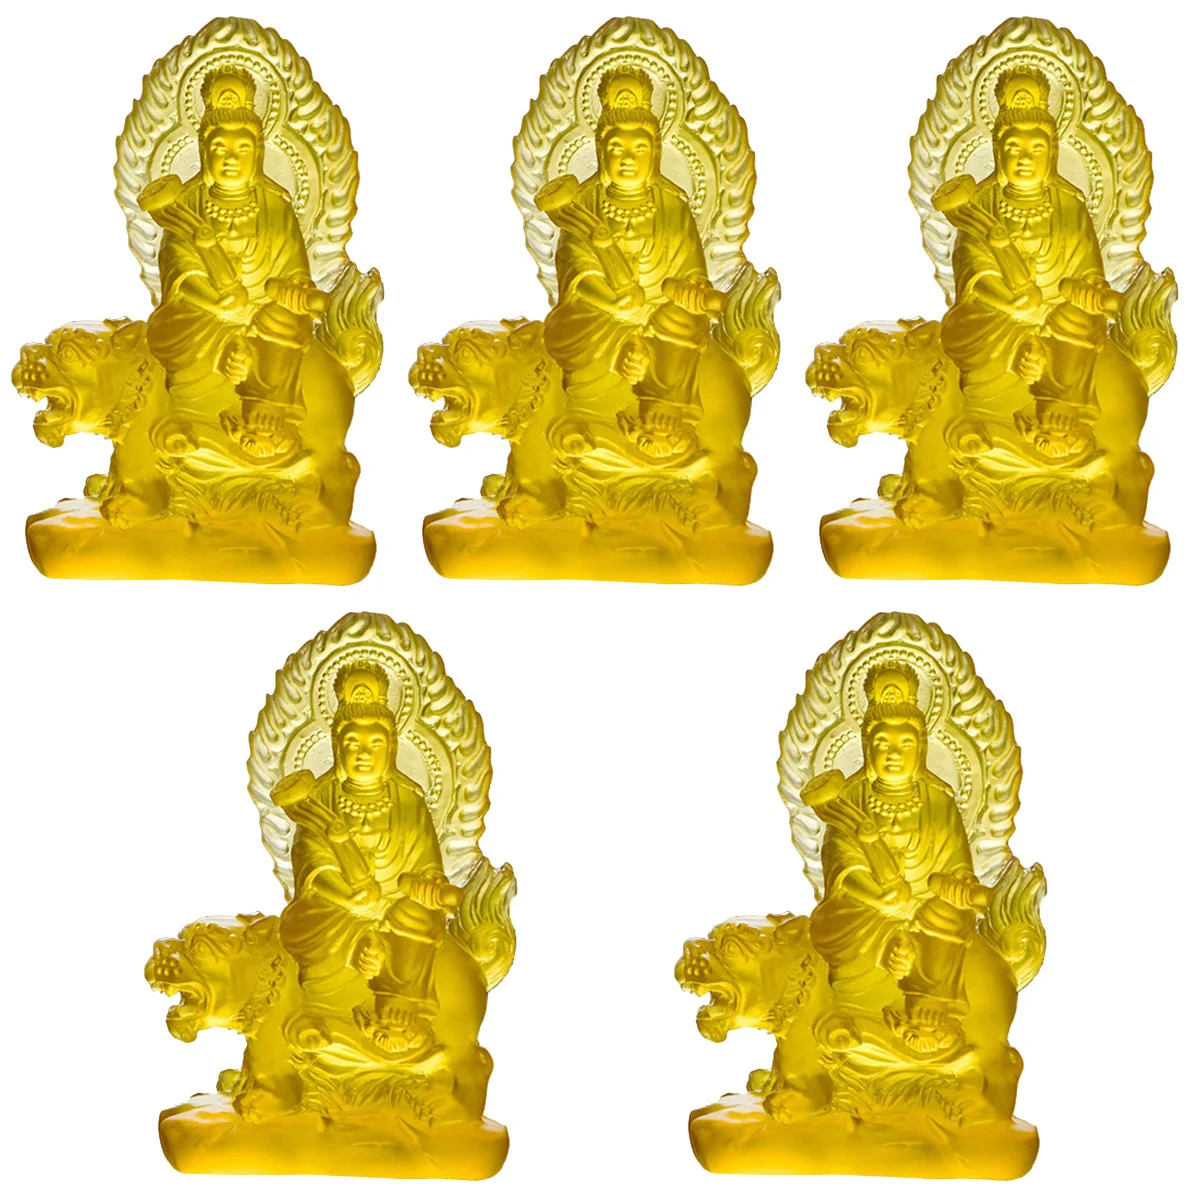 5x Zen Home Office Temple Figurine For Home Figurine Household Craft Exquisite Craft for Office